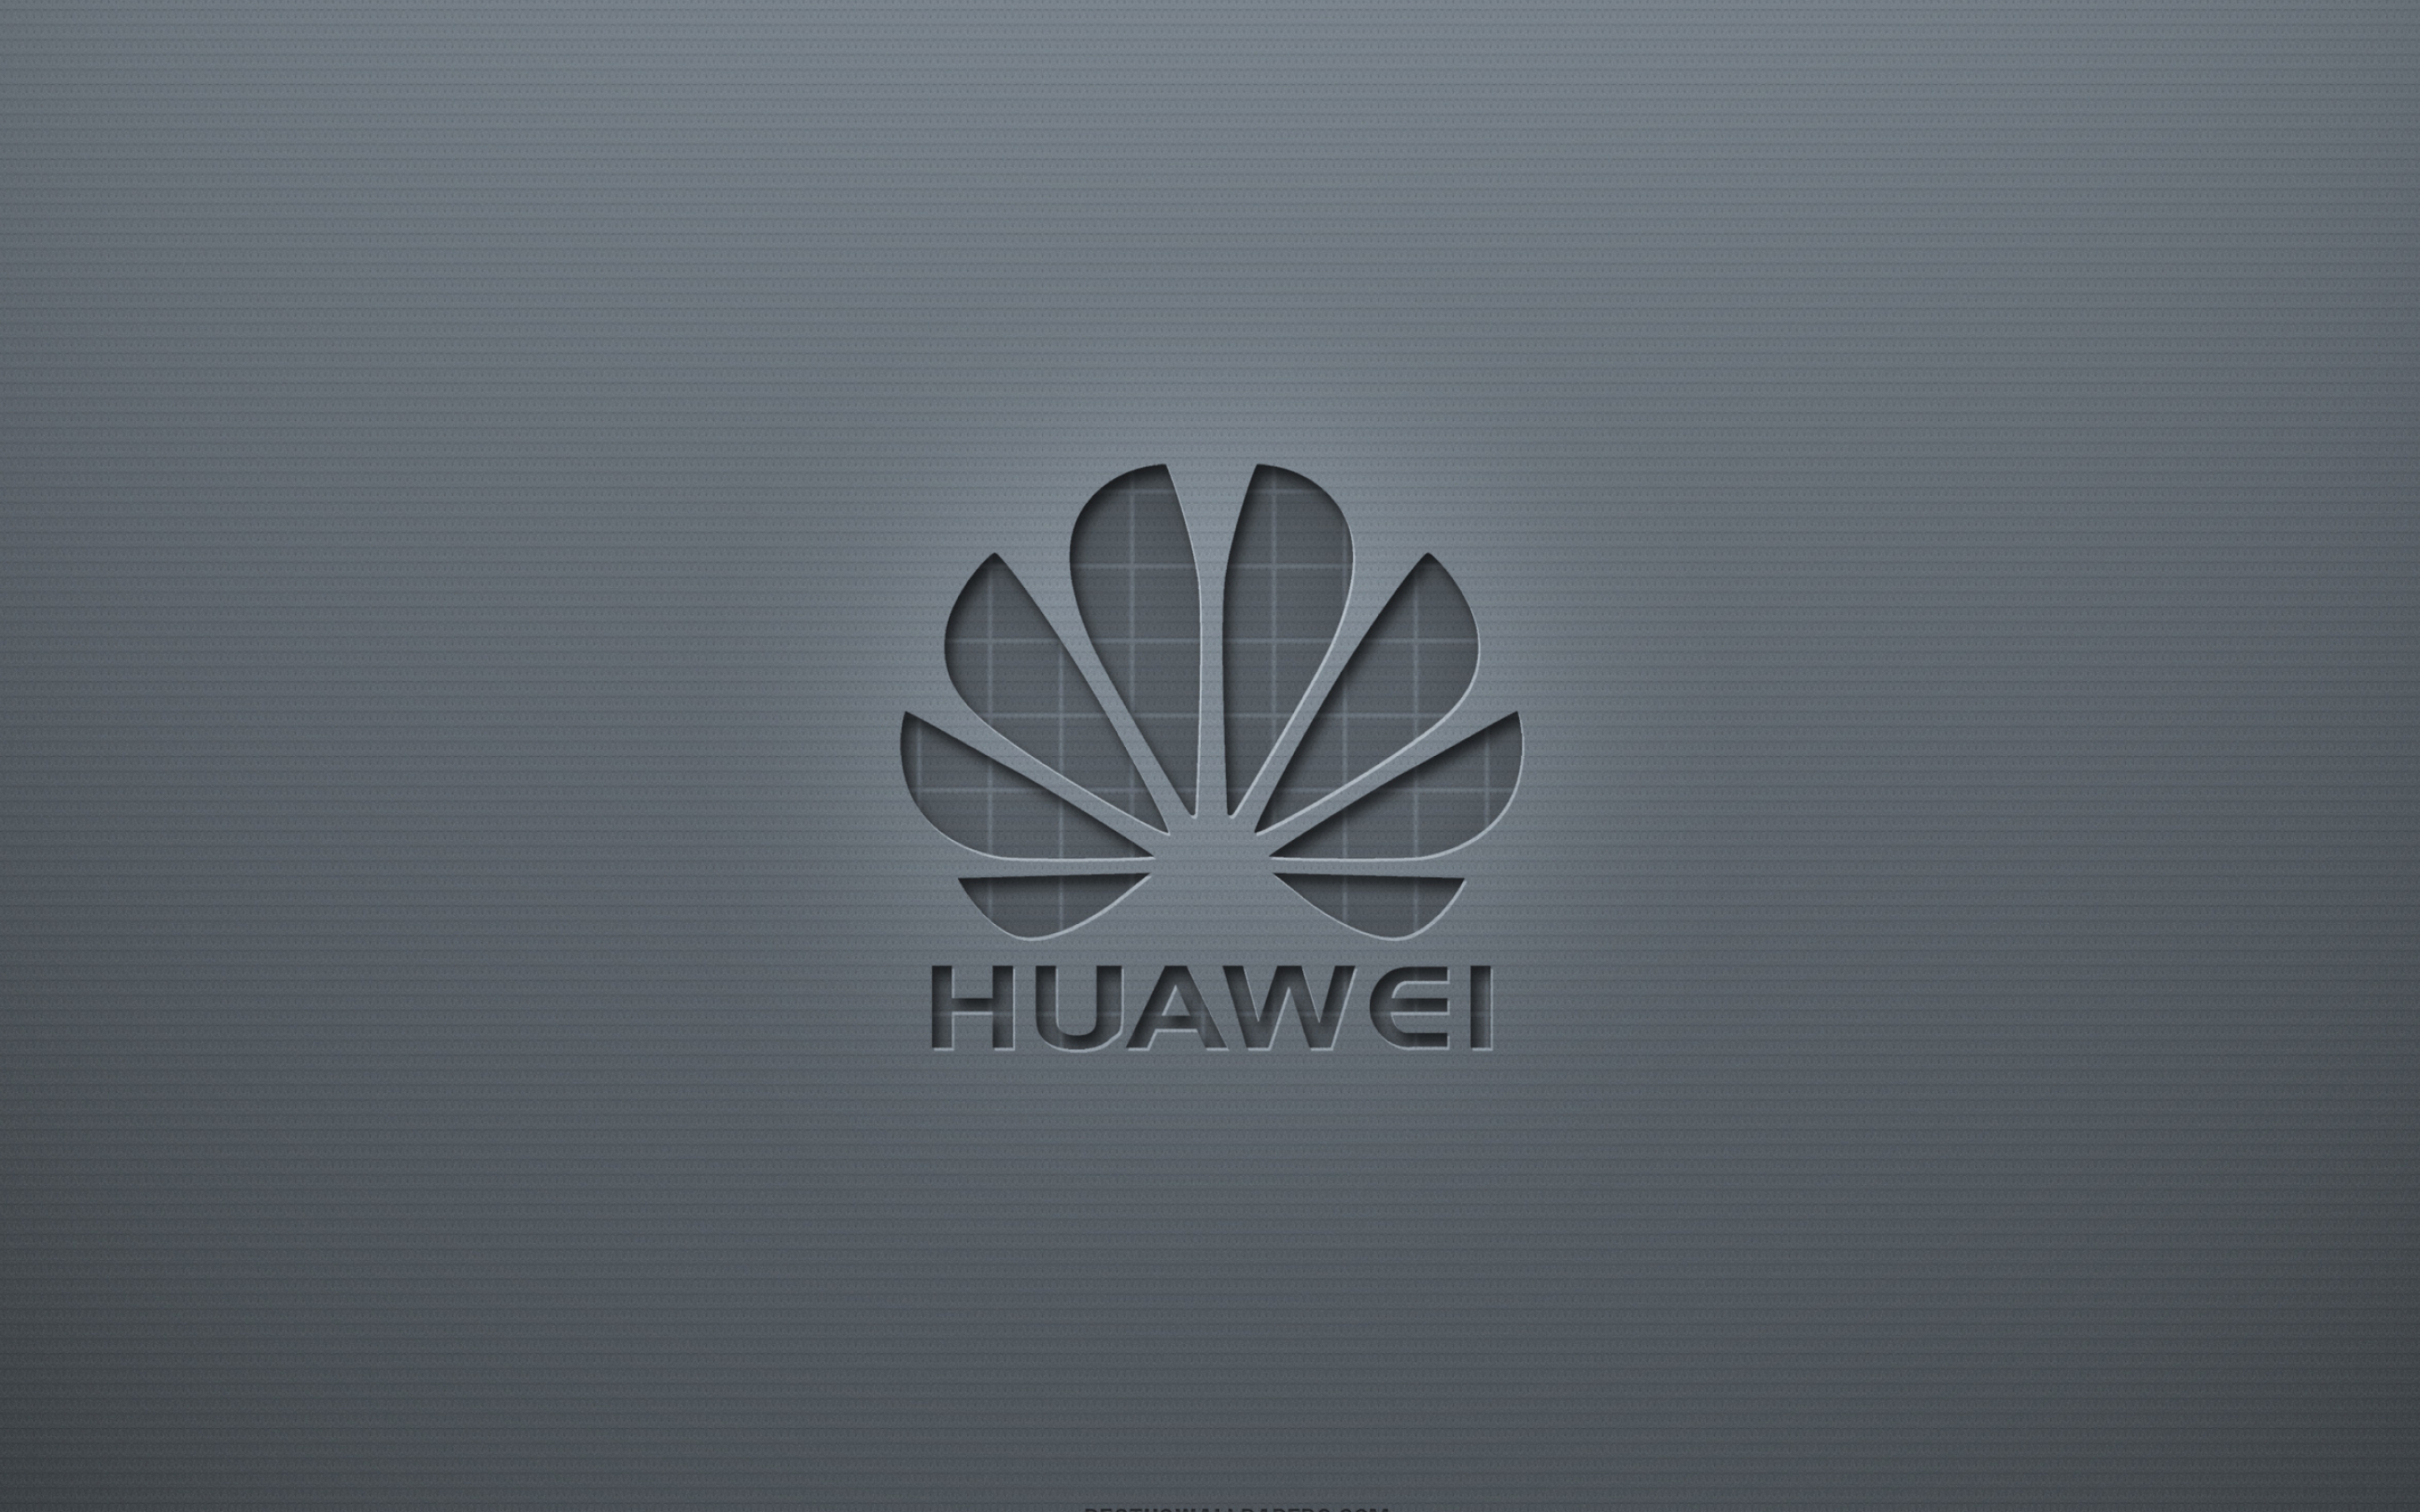 Huawei: A high-tech enterprise that specializes in telecommunications equipment, Chinese. 2880x1800 HD Wallpaper.